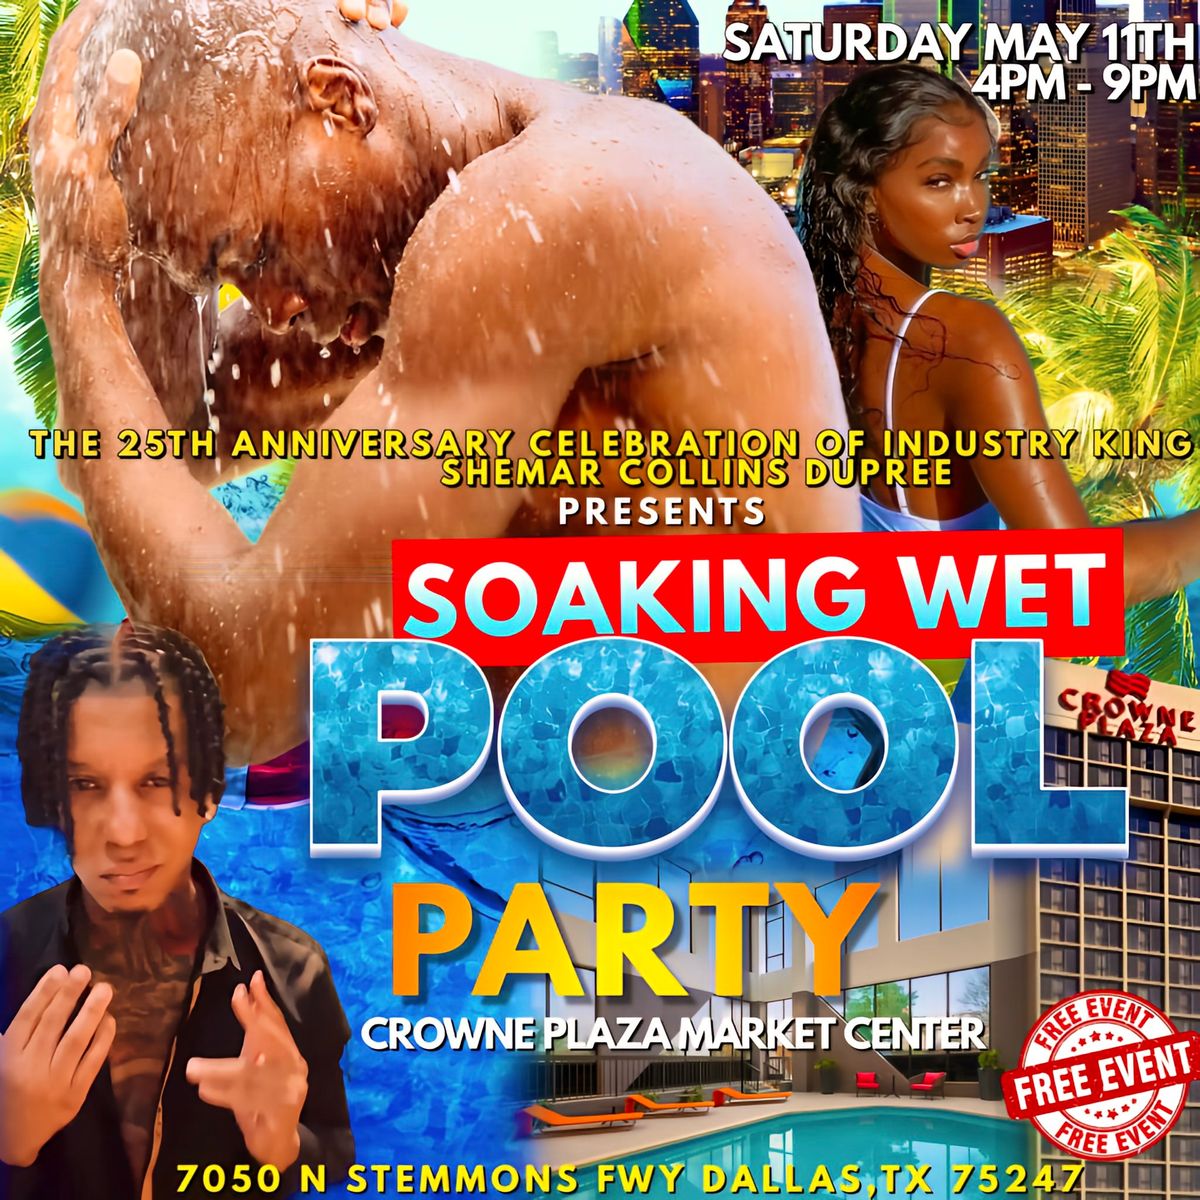 SOAKING WET POOL & DAY PARTY 